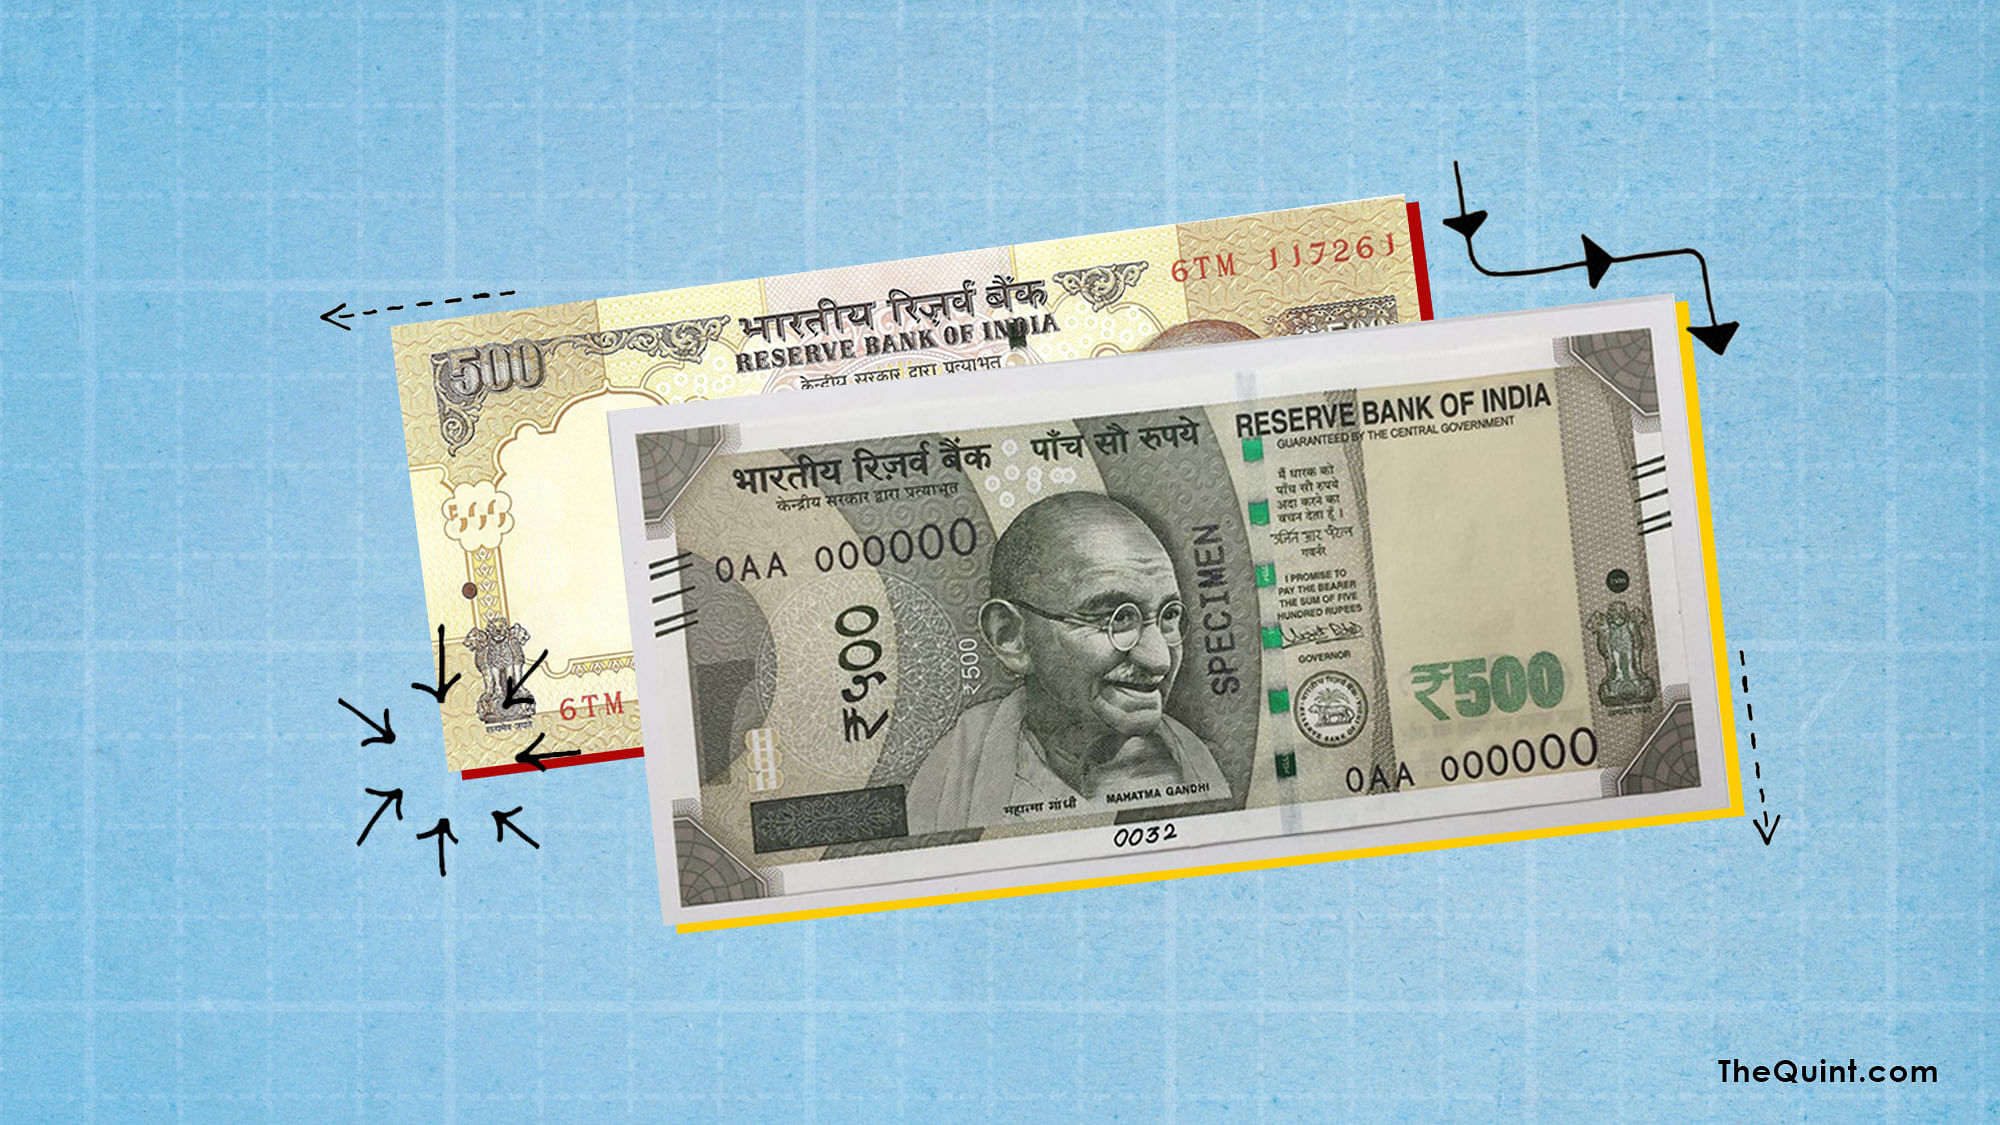 The colours in the new 500 rupee note have been toned down. But what more has changed? Here’s a look. (Photo: Aaqib Raza Khan/<b>The Quint</b>)&nbsp;